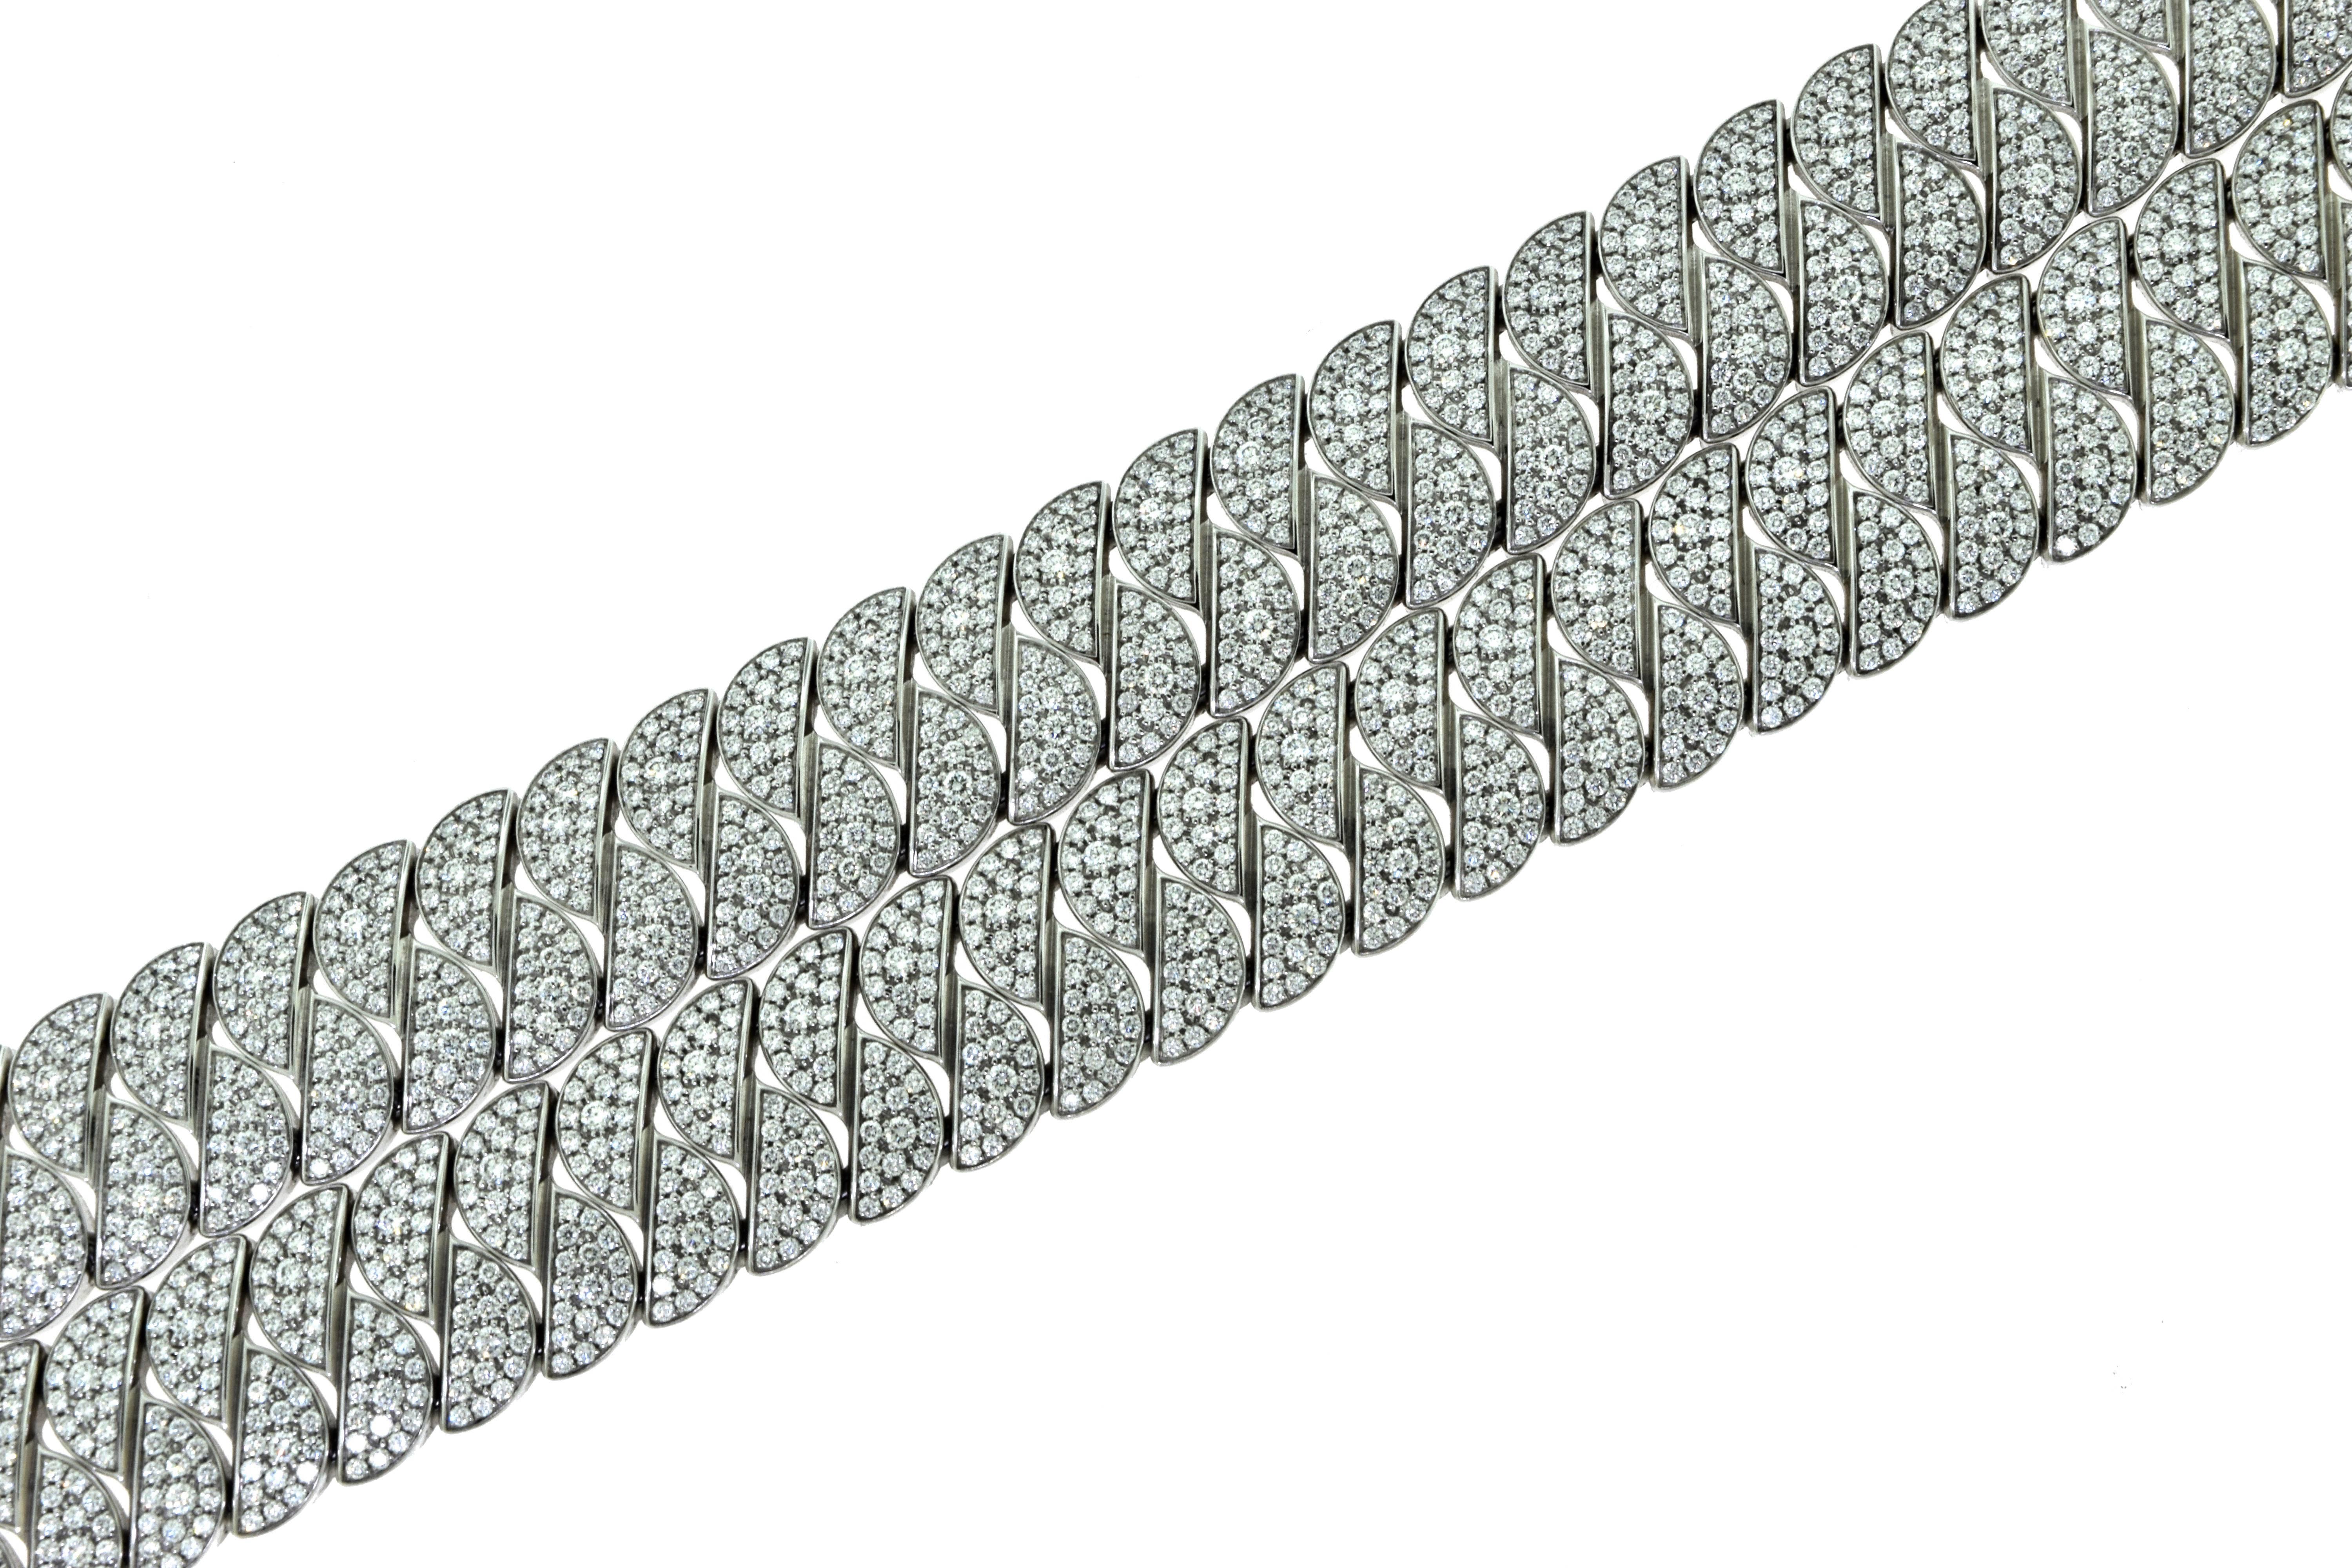 Cartier: a Diamond 'LA DONA' Bracelet designed as an articulated double row of pavé-set brilliant-cut diamond semi-circular shaped links, to a concealed clasp

Designer: CARTIER
Style: La Dona
Metal: White Gold
Metal Purity: 18k
Stones: